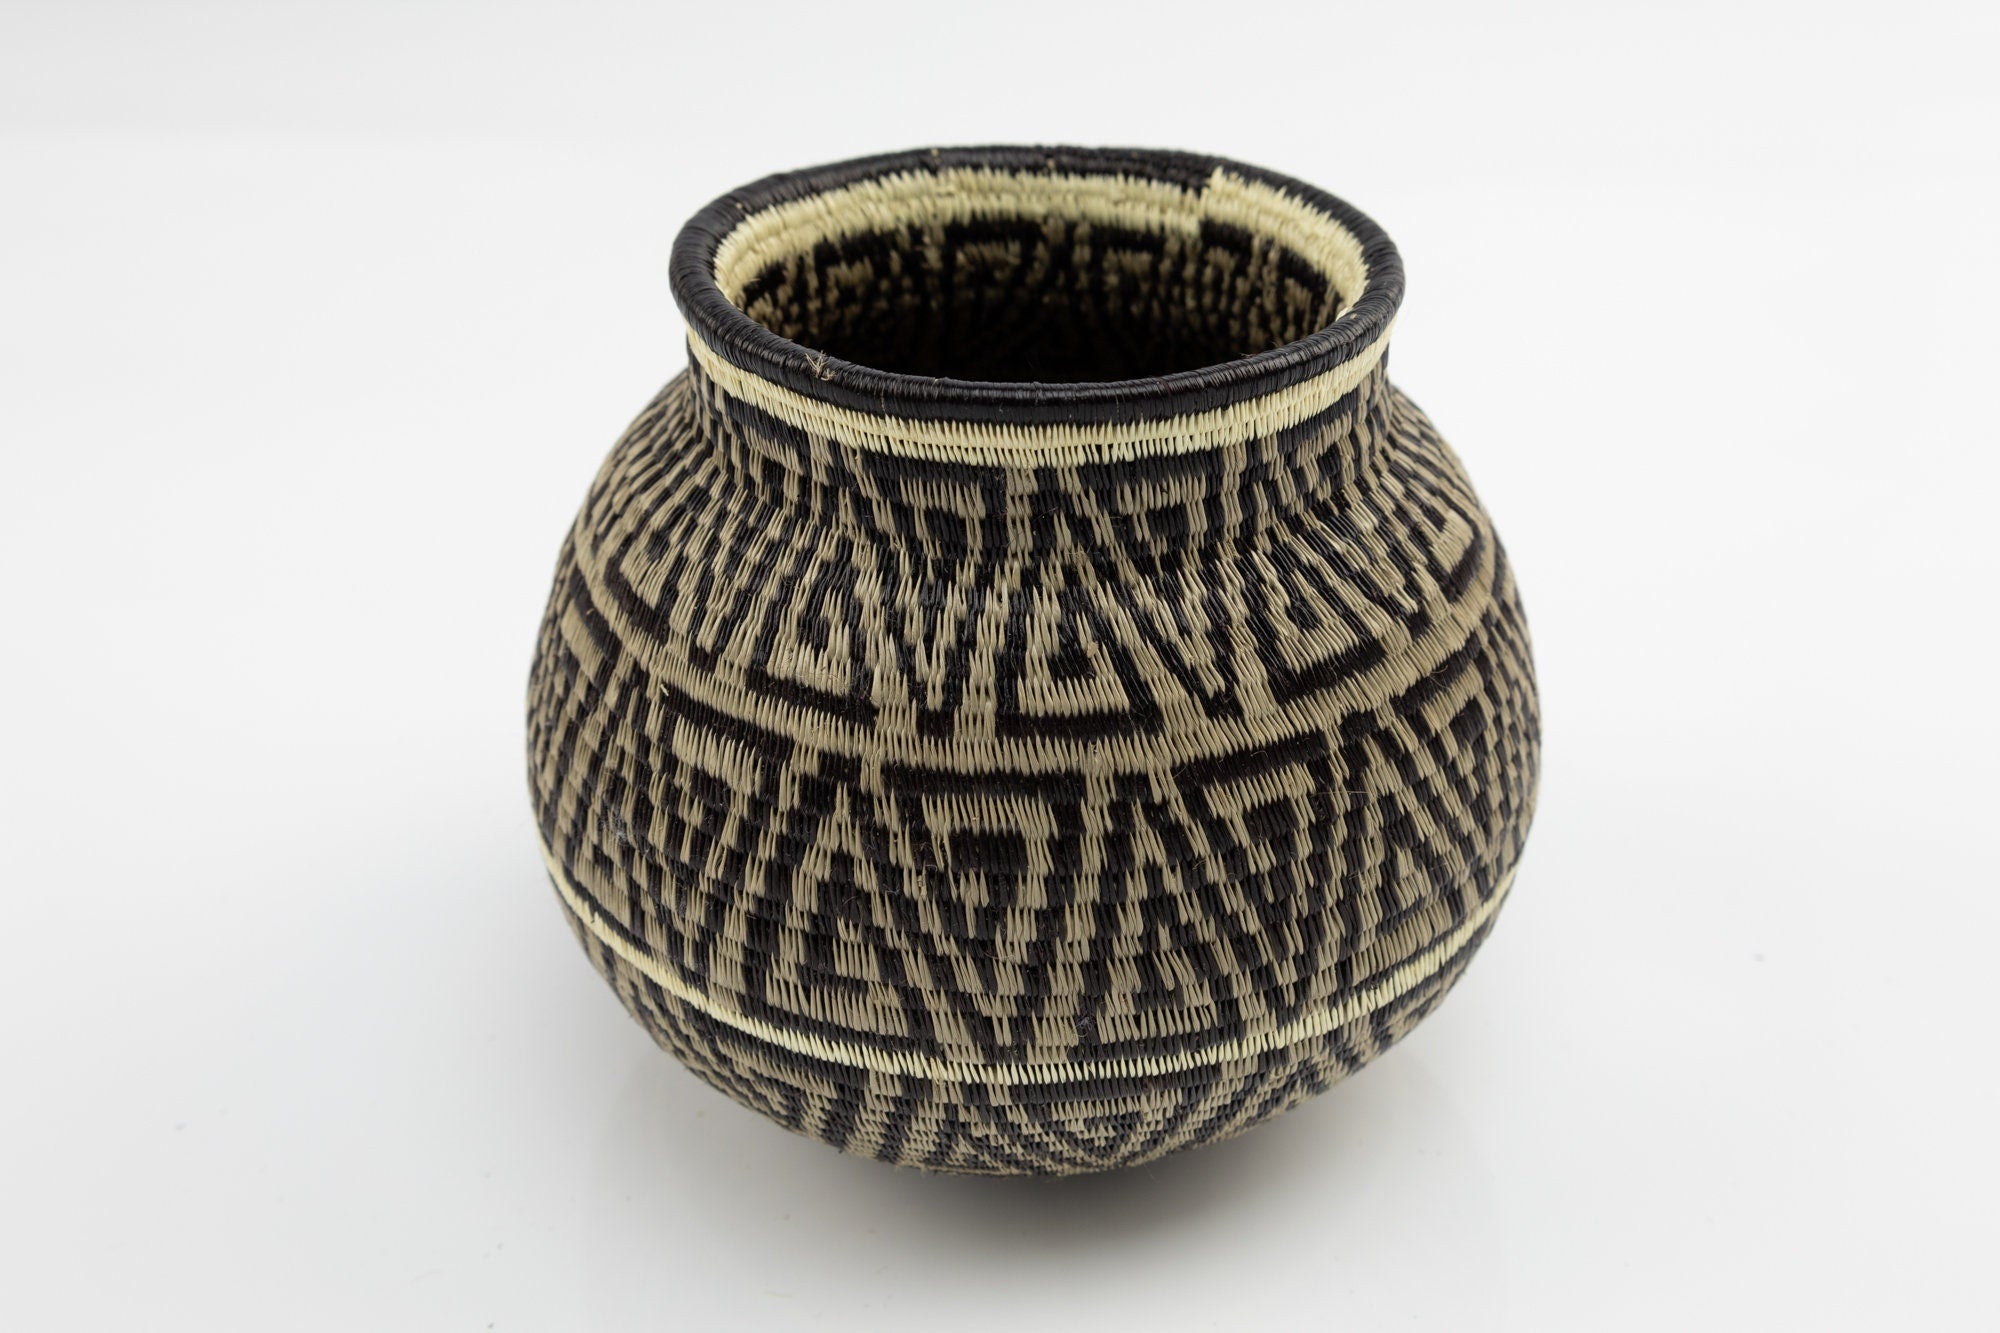 Hand Woven Black and Gray Basket Made By Wounaan And Emberá Panama Indians. Bowl Basket, Woven Basket, Basket Decor, Woven Storage